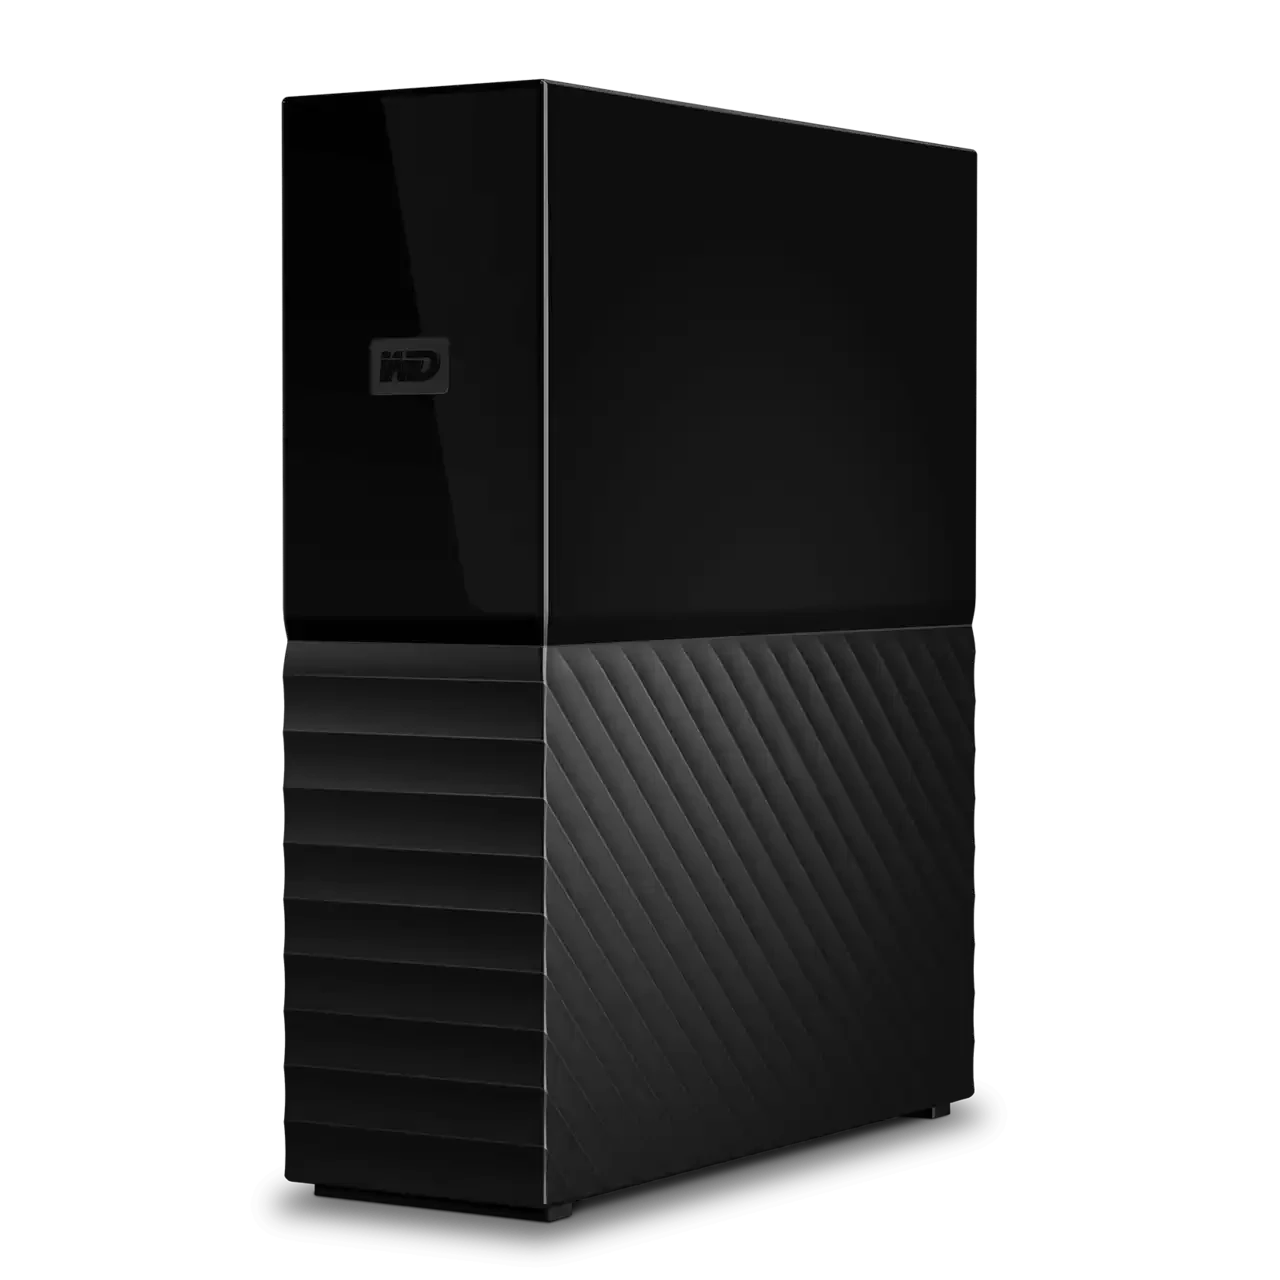 WD 14TB My Book Desktop Storage Complete Backup with Password Protection